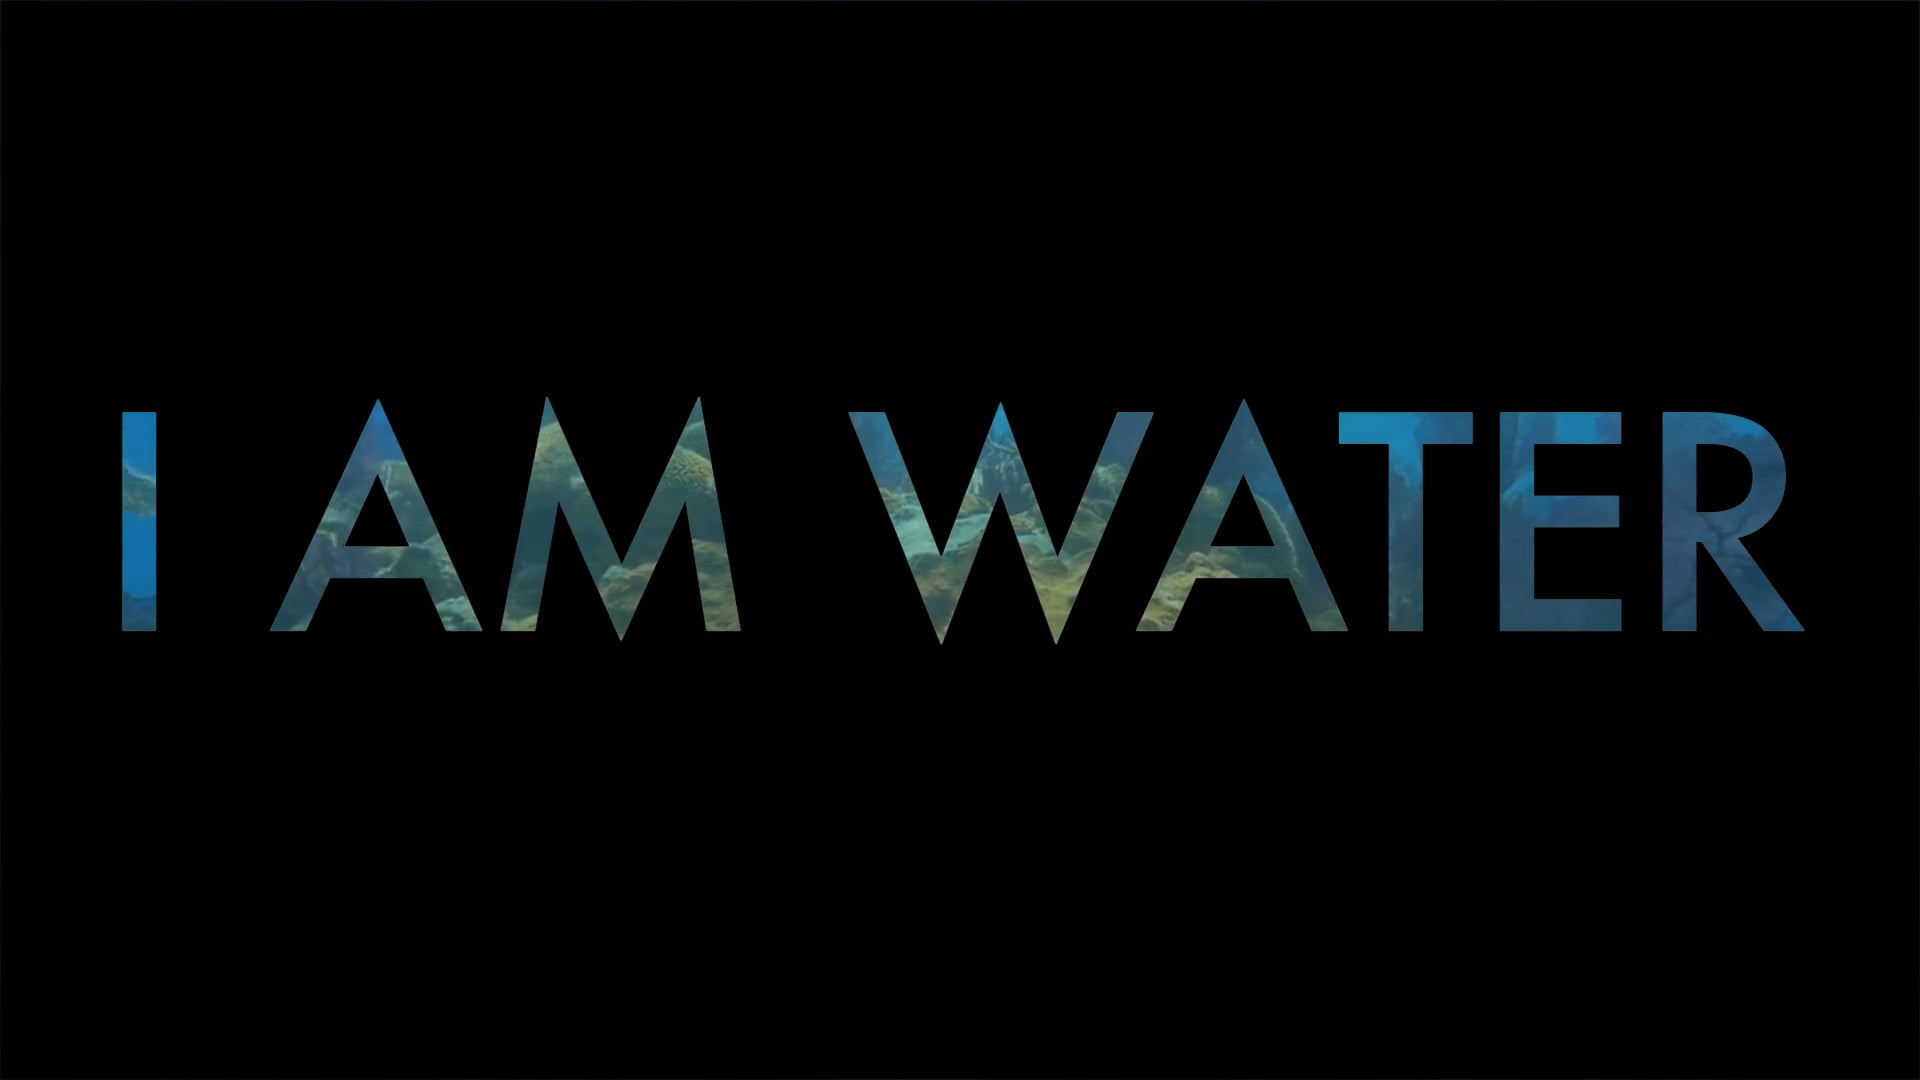 I AM WATER